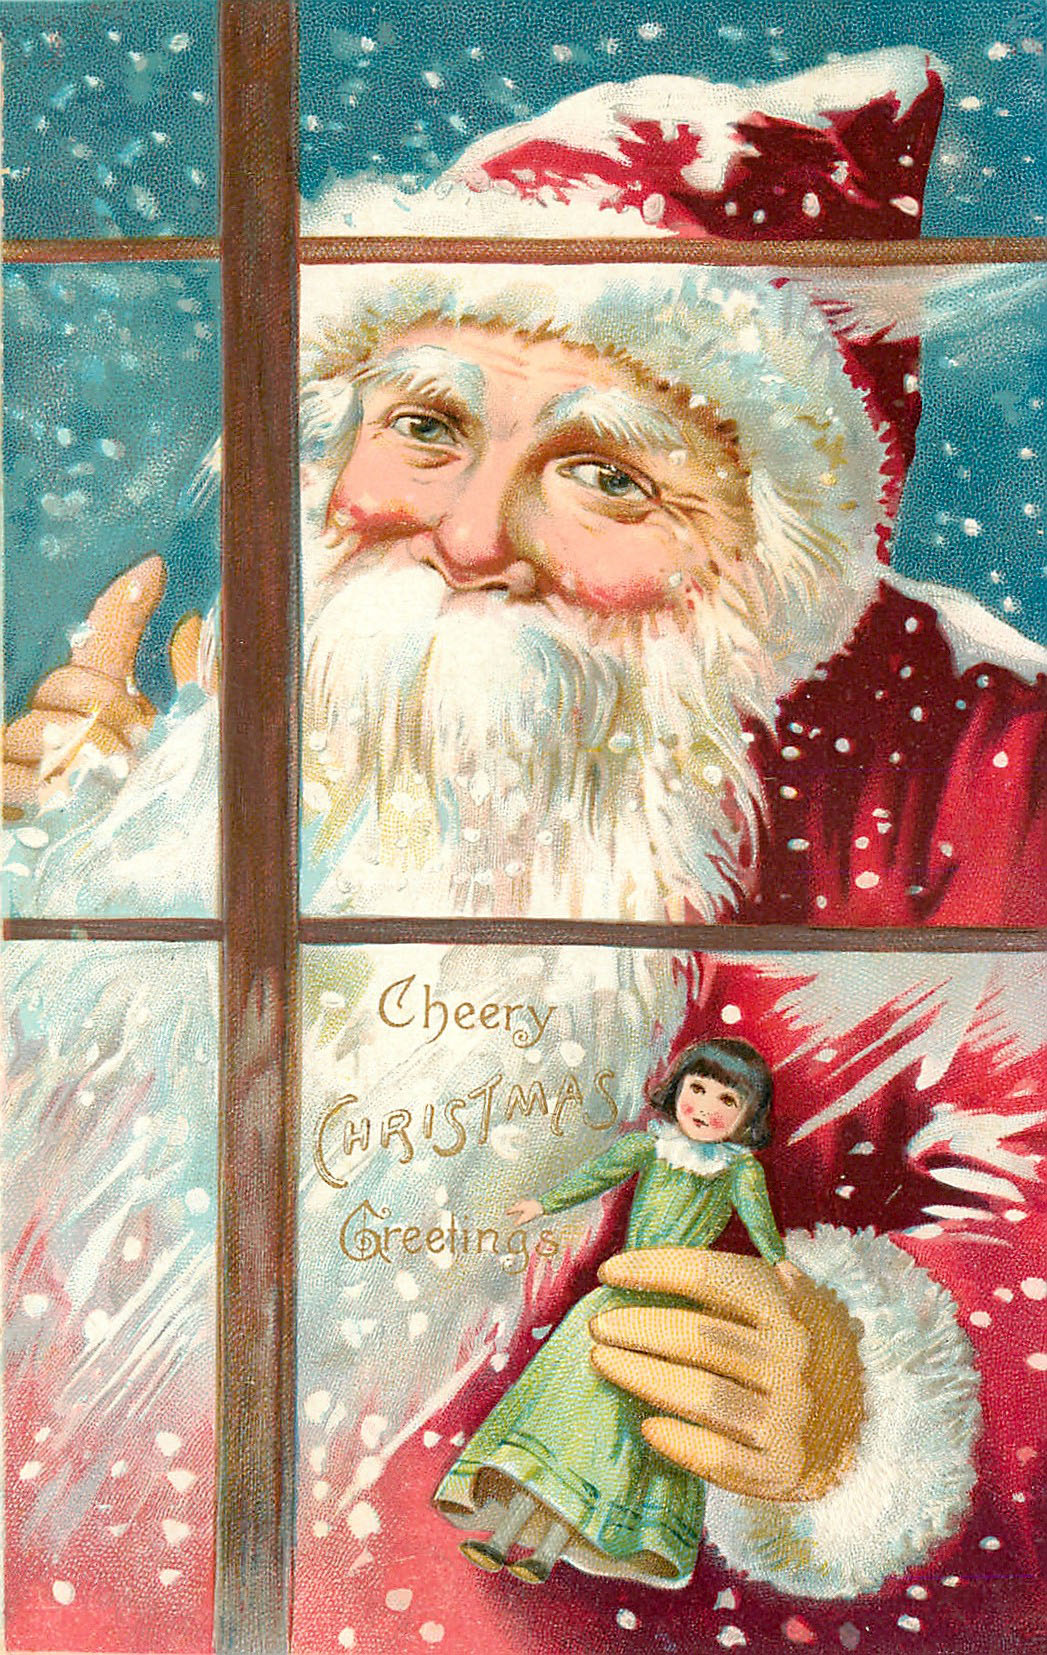 father christmas in victorian times clipart